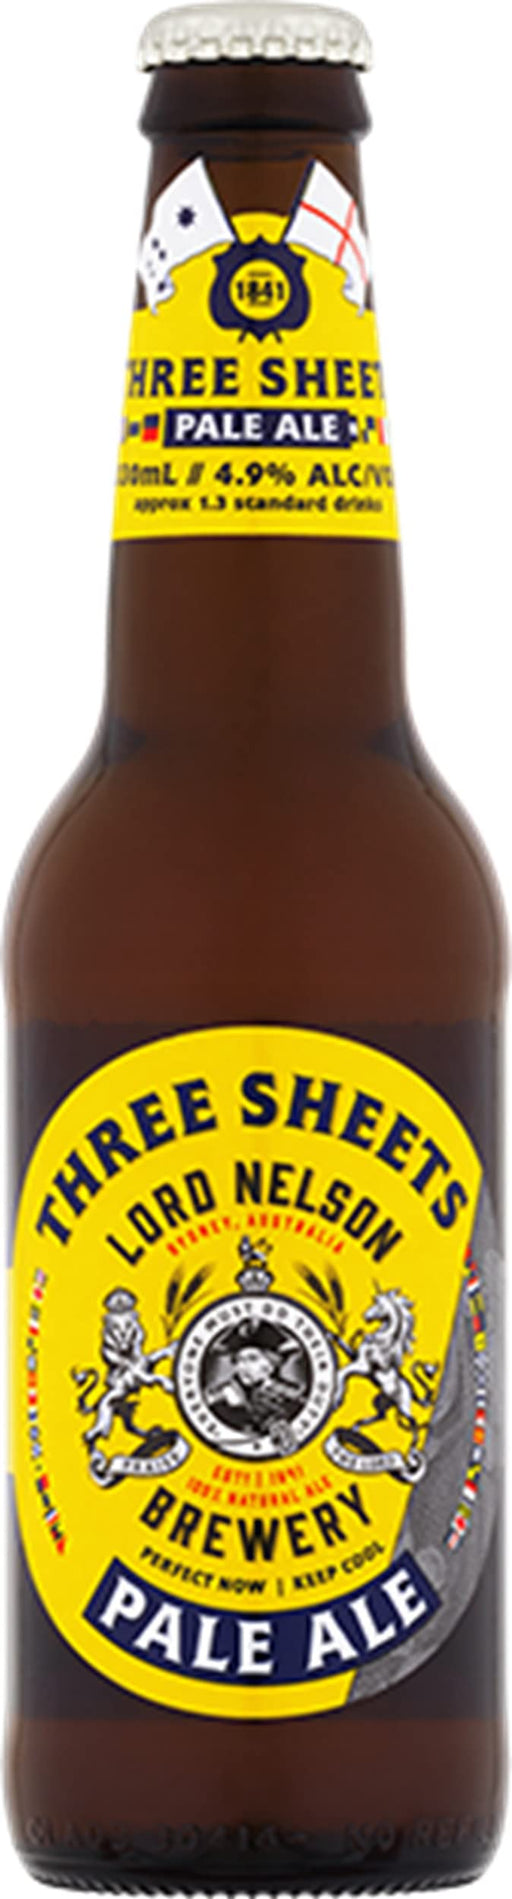 Lord Nelson Brewery Three Sheets Pale Ale 330 ml, Pack of 24  Lord Nelson